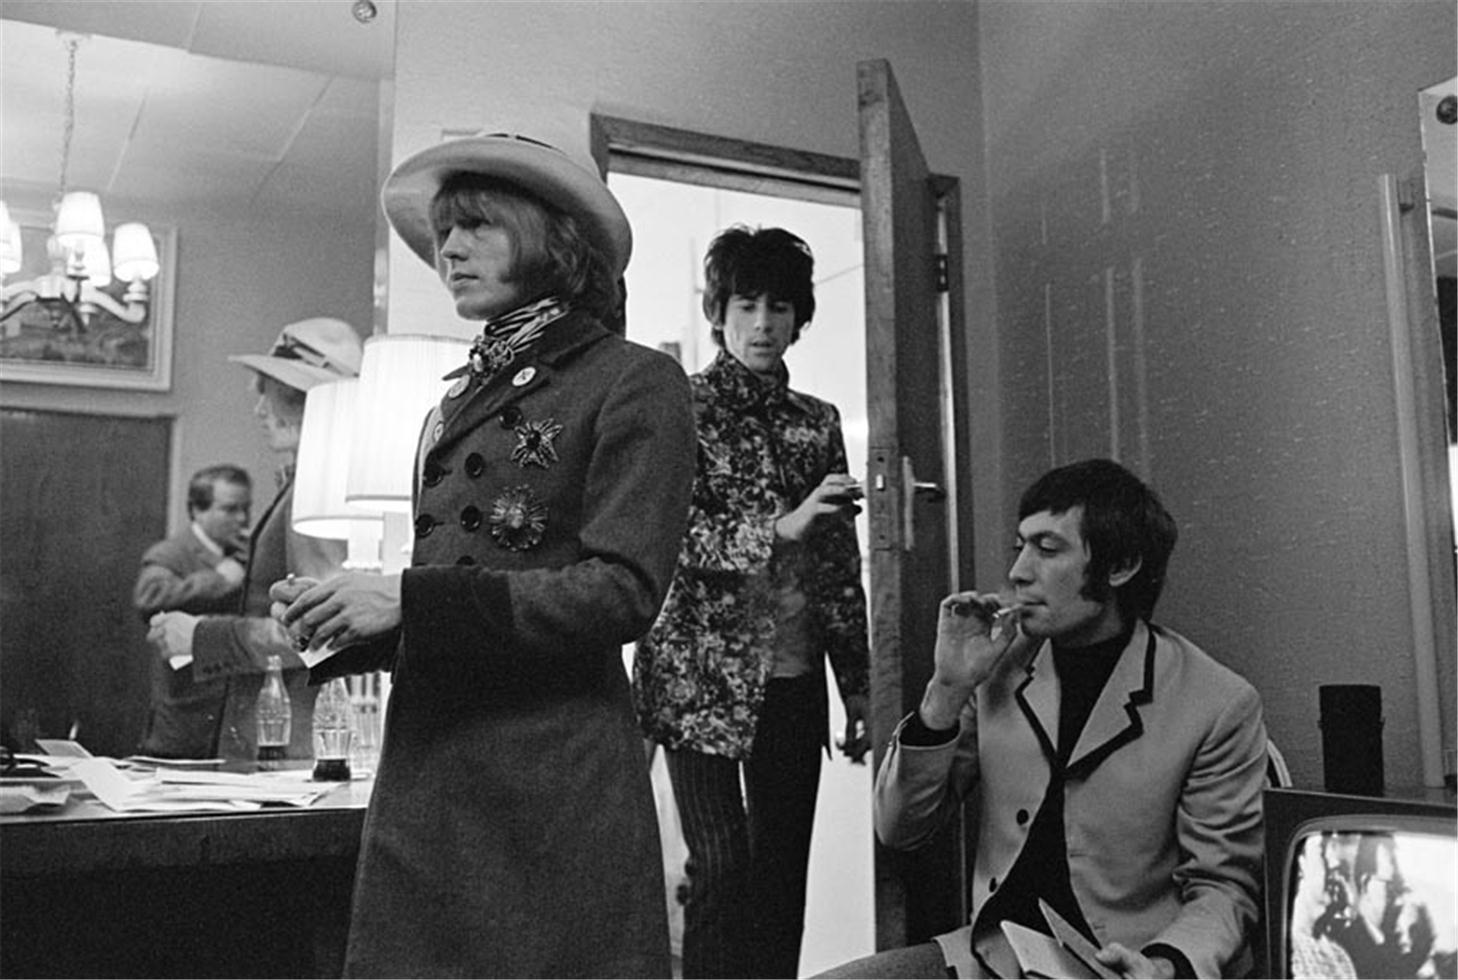 Gered Mankowitz Black and White Photograph - The Rolling Stones Backstage